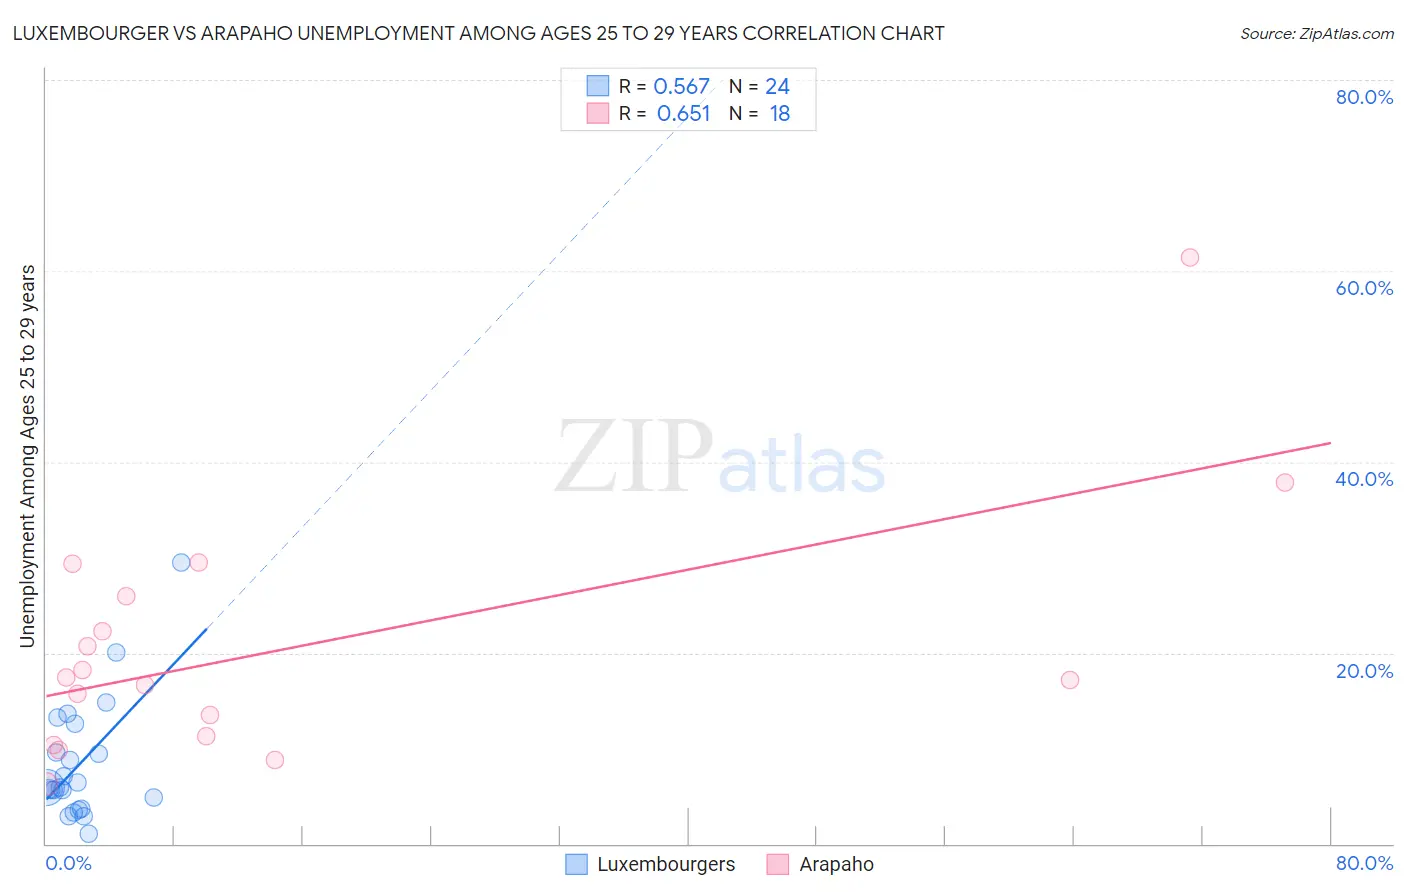 Luxembourger vs Arapaho Unemployment Among Ages 25 to 29 years